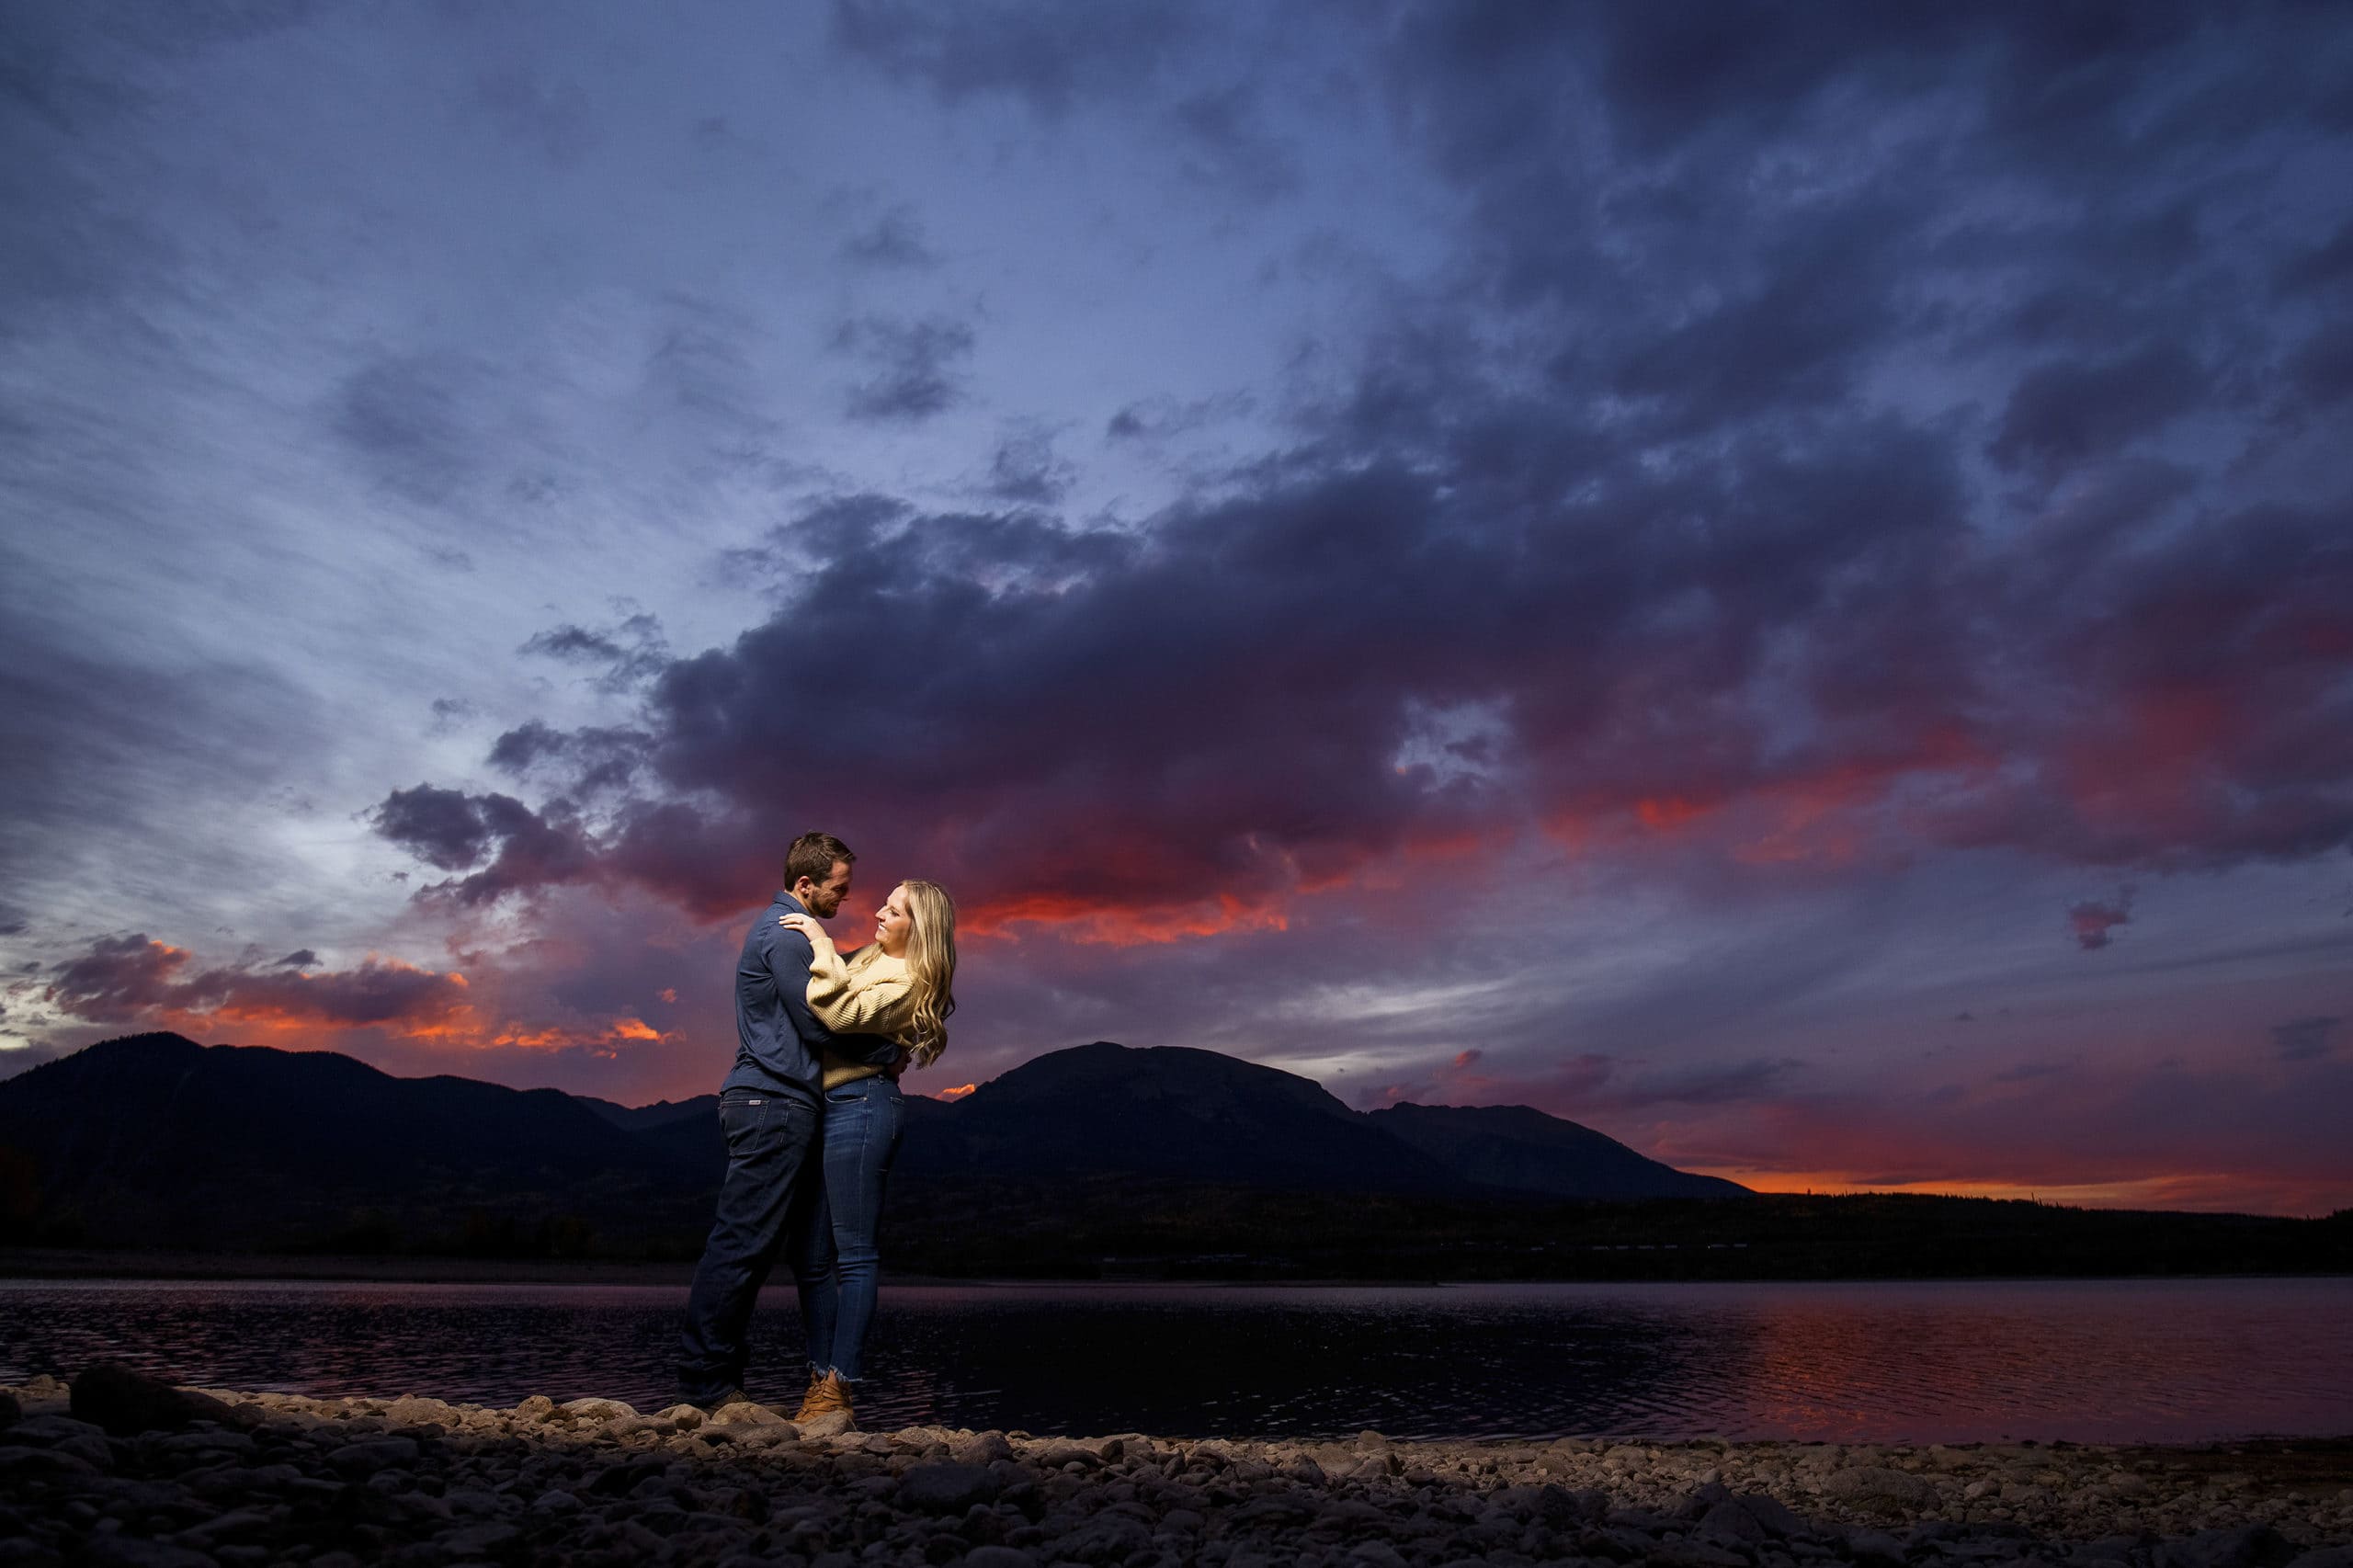 Chad embraces Jamie near the edge of Dillon Reservoir at sunset during their engagement photos